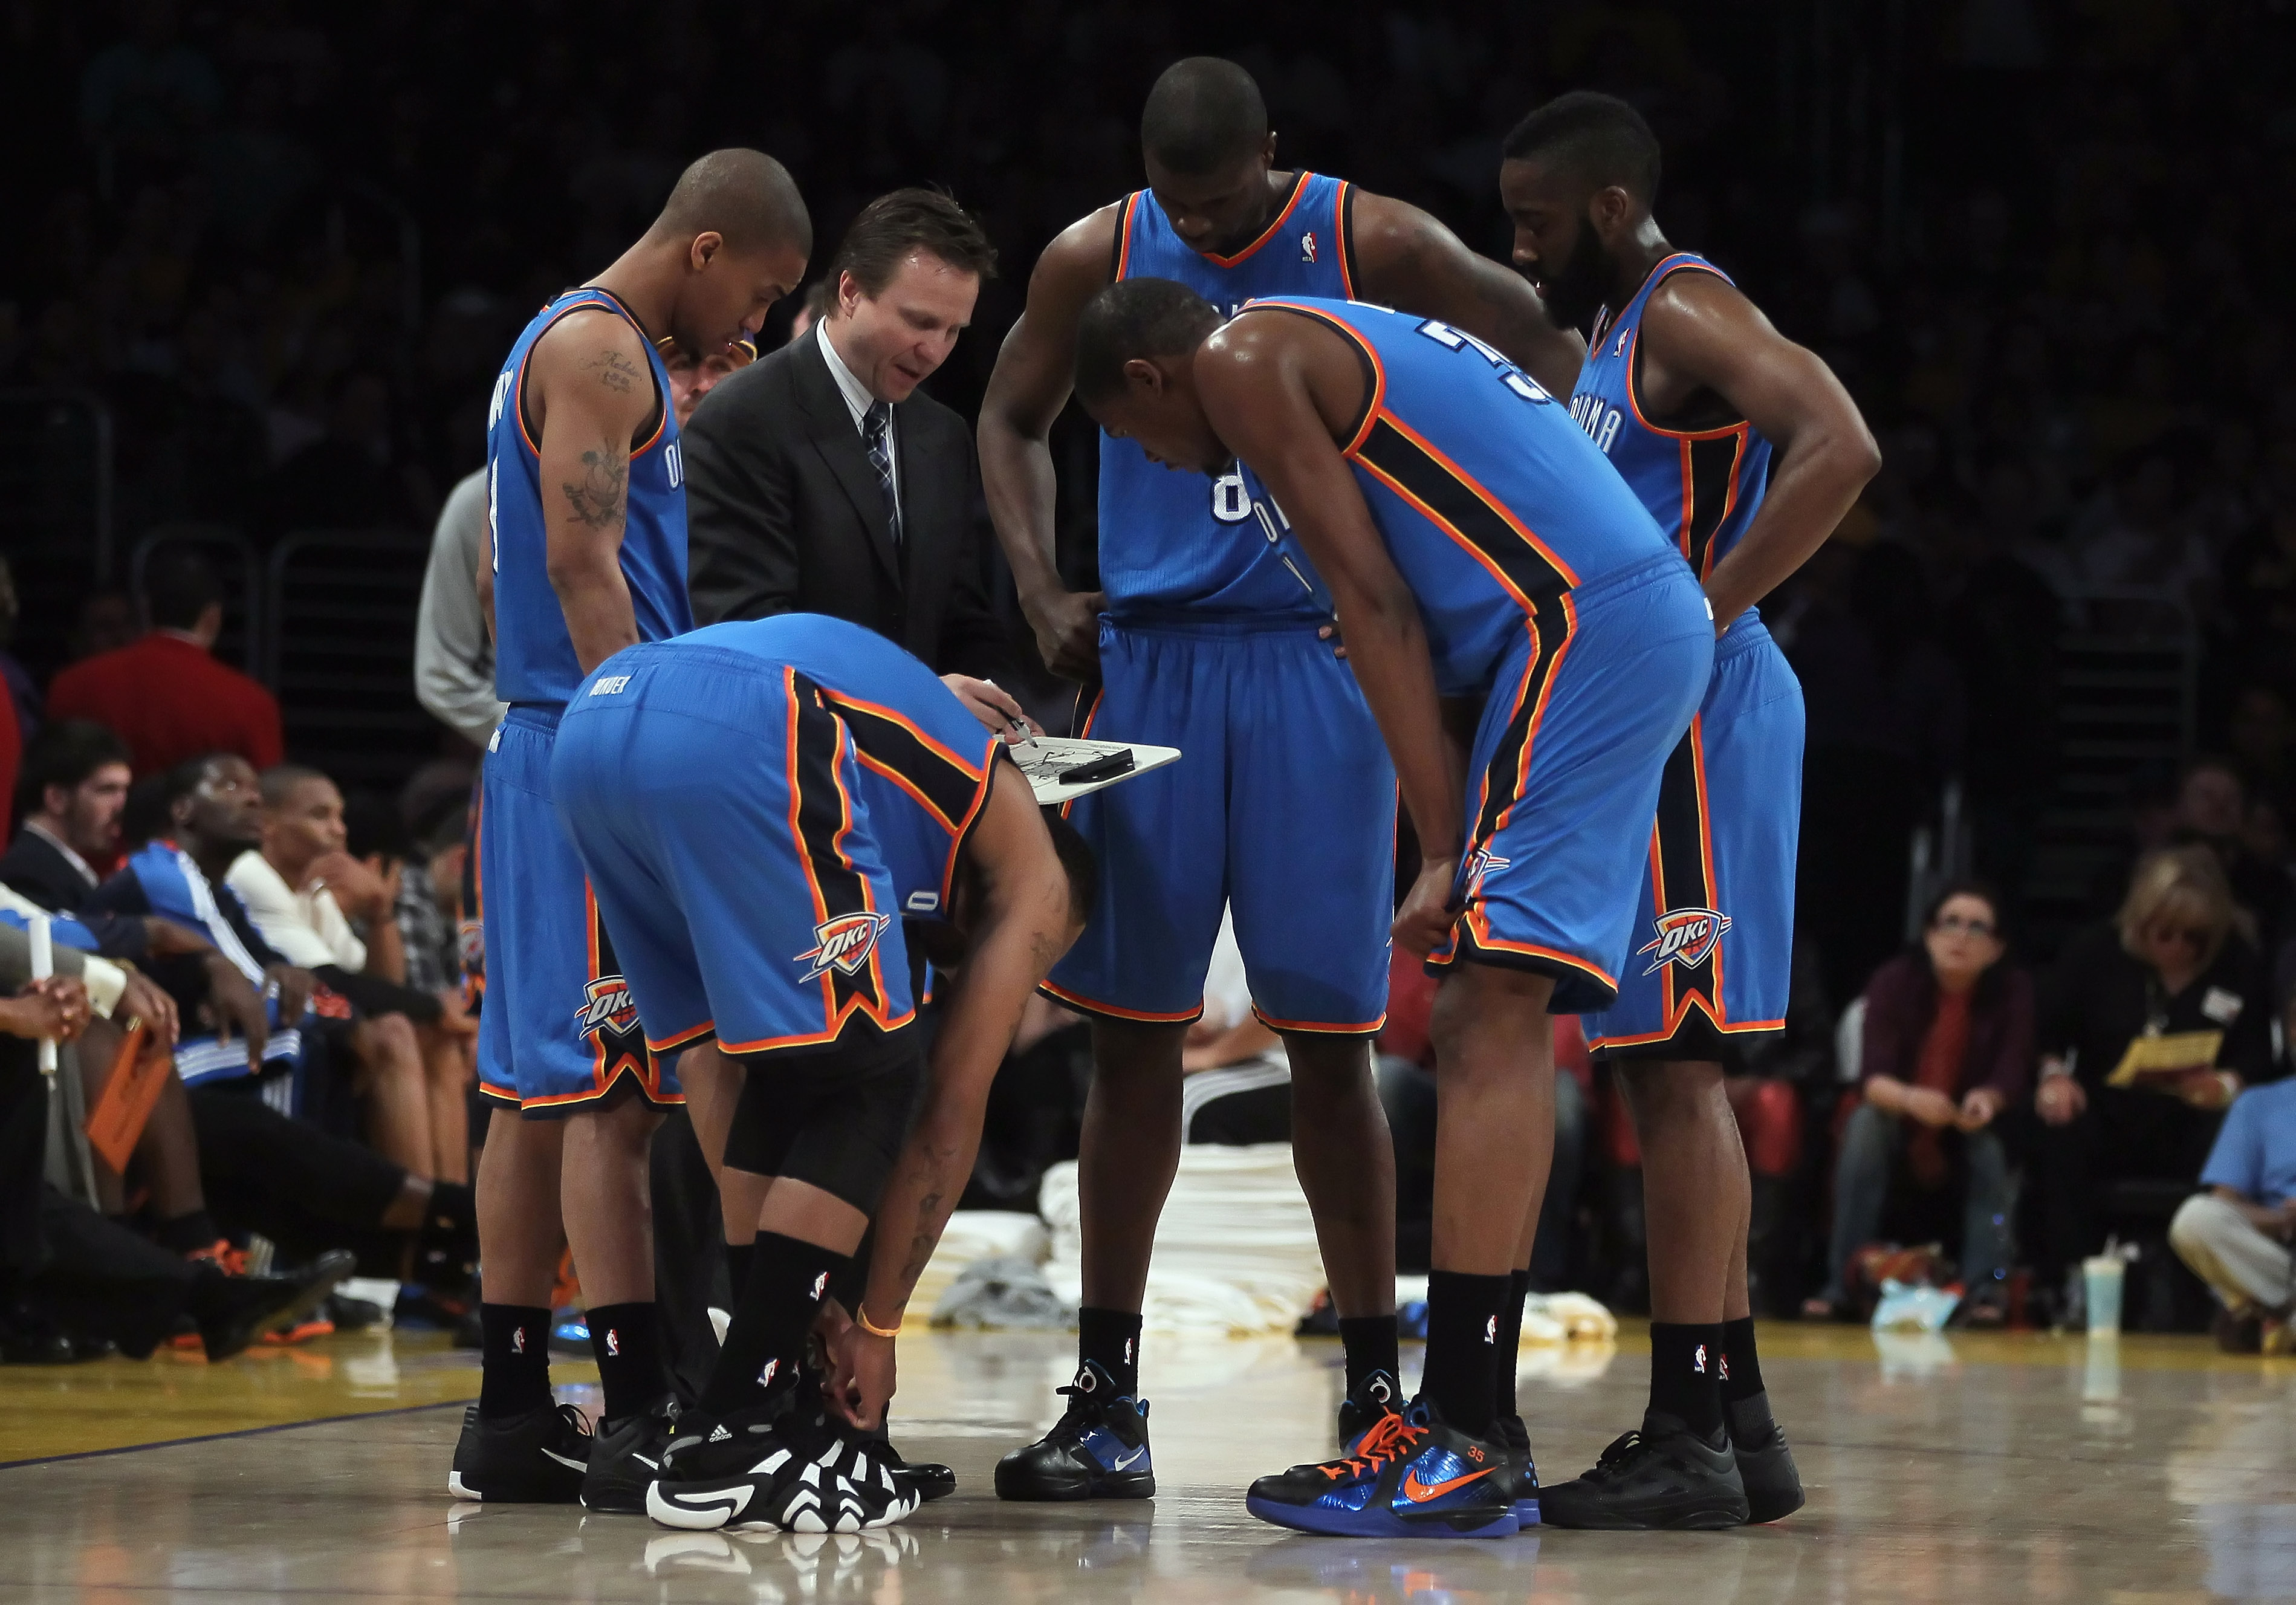 LOS ANGELES, CA - APRIL 10:  Oklahoma City Thunder head coach Scott Brooks draws up a play for his team during a timeout in the first half against the Los Angeles Lakers at Staples Center on April 10, 2011 in Los Angeles, California. The Thunder defeated